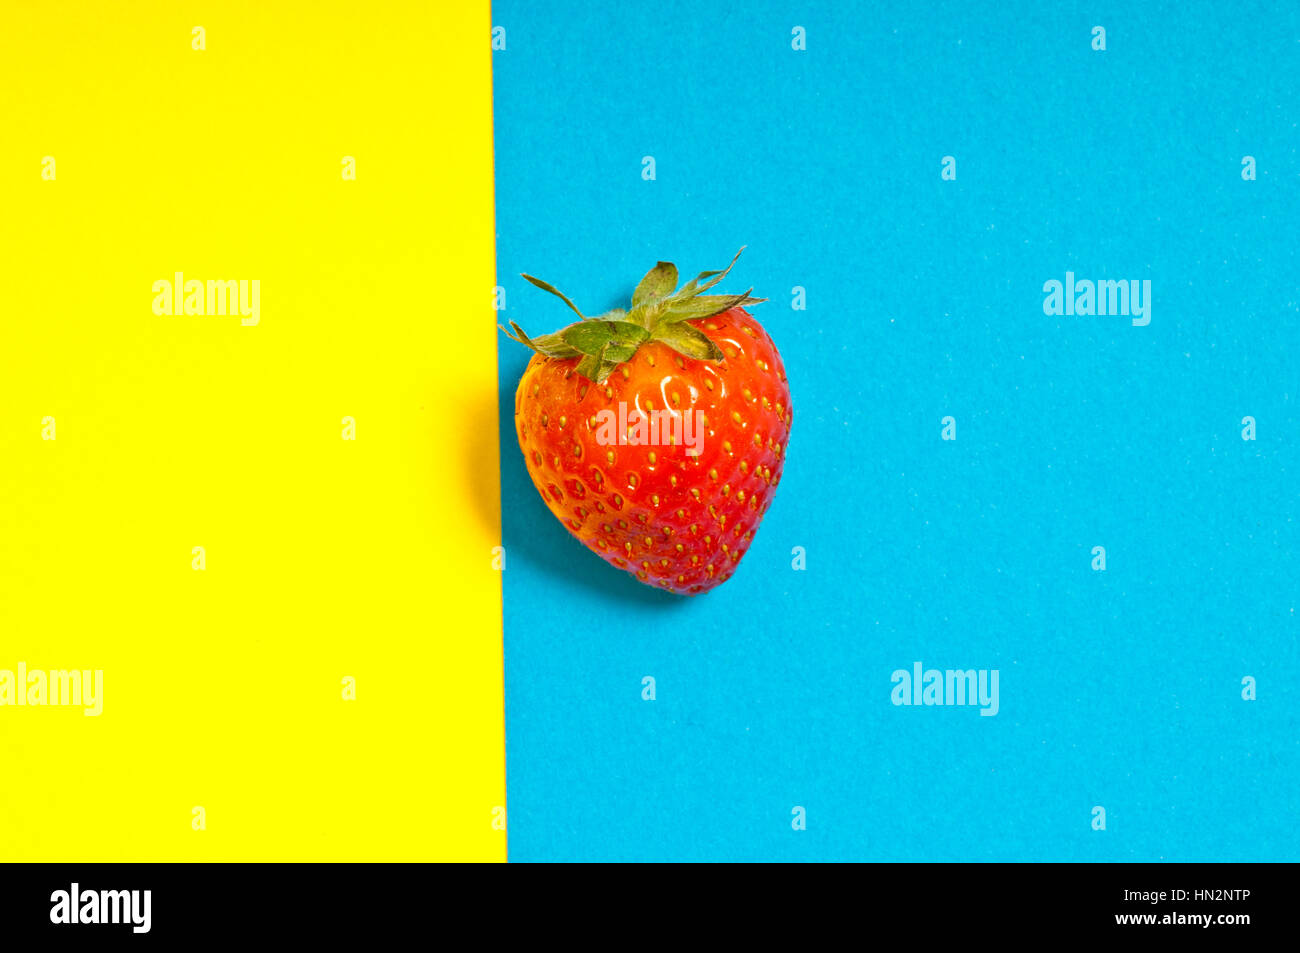 strawberry on a background yellow and blue Stock Photo